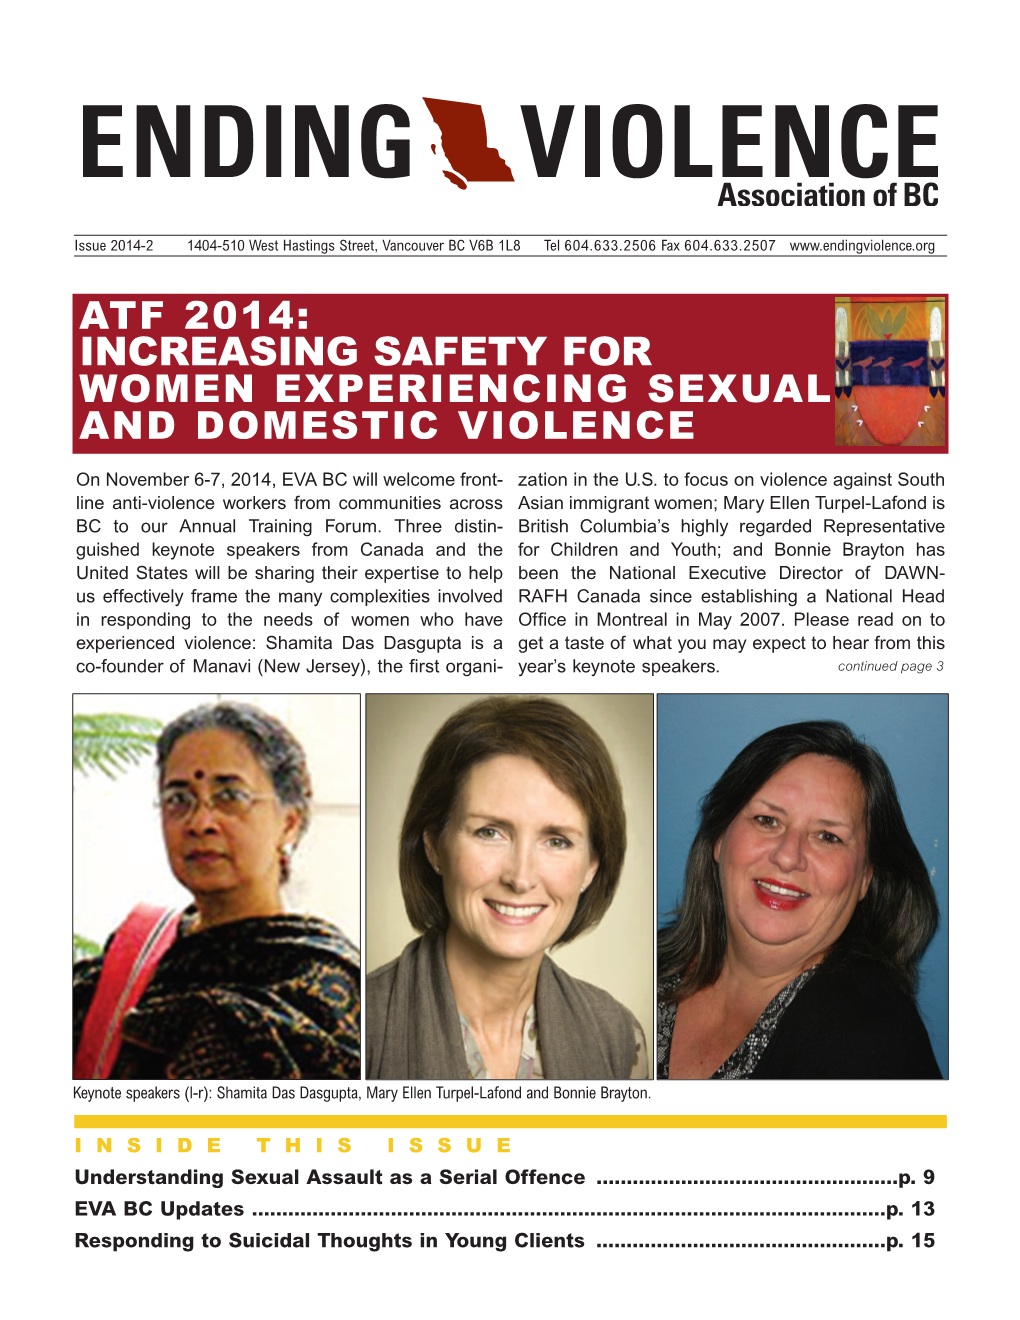 Increasing Safety for Women Experiencing Sexual and Domestic Violence